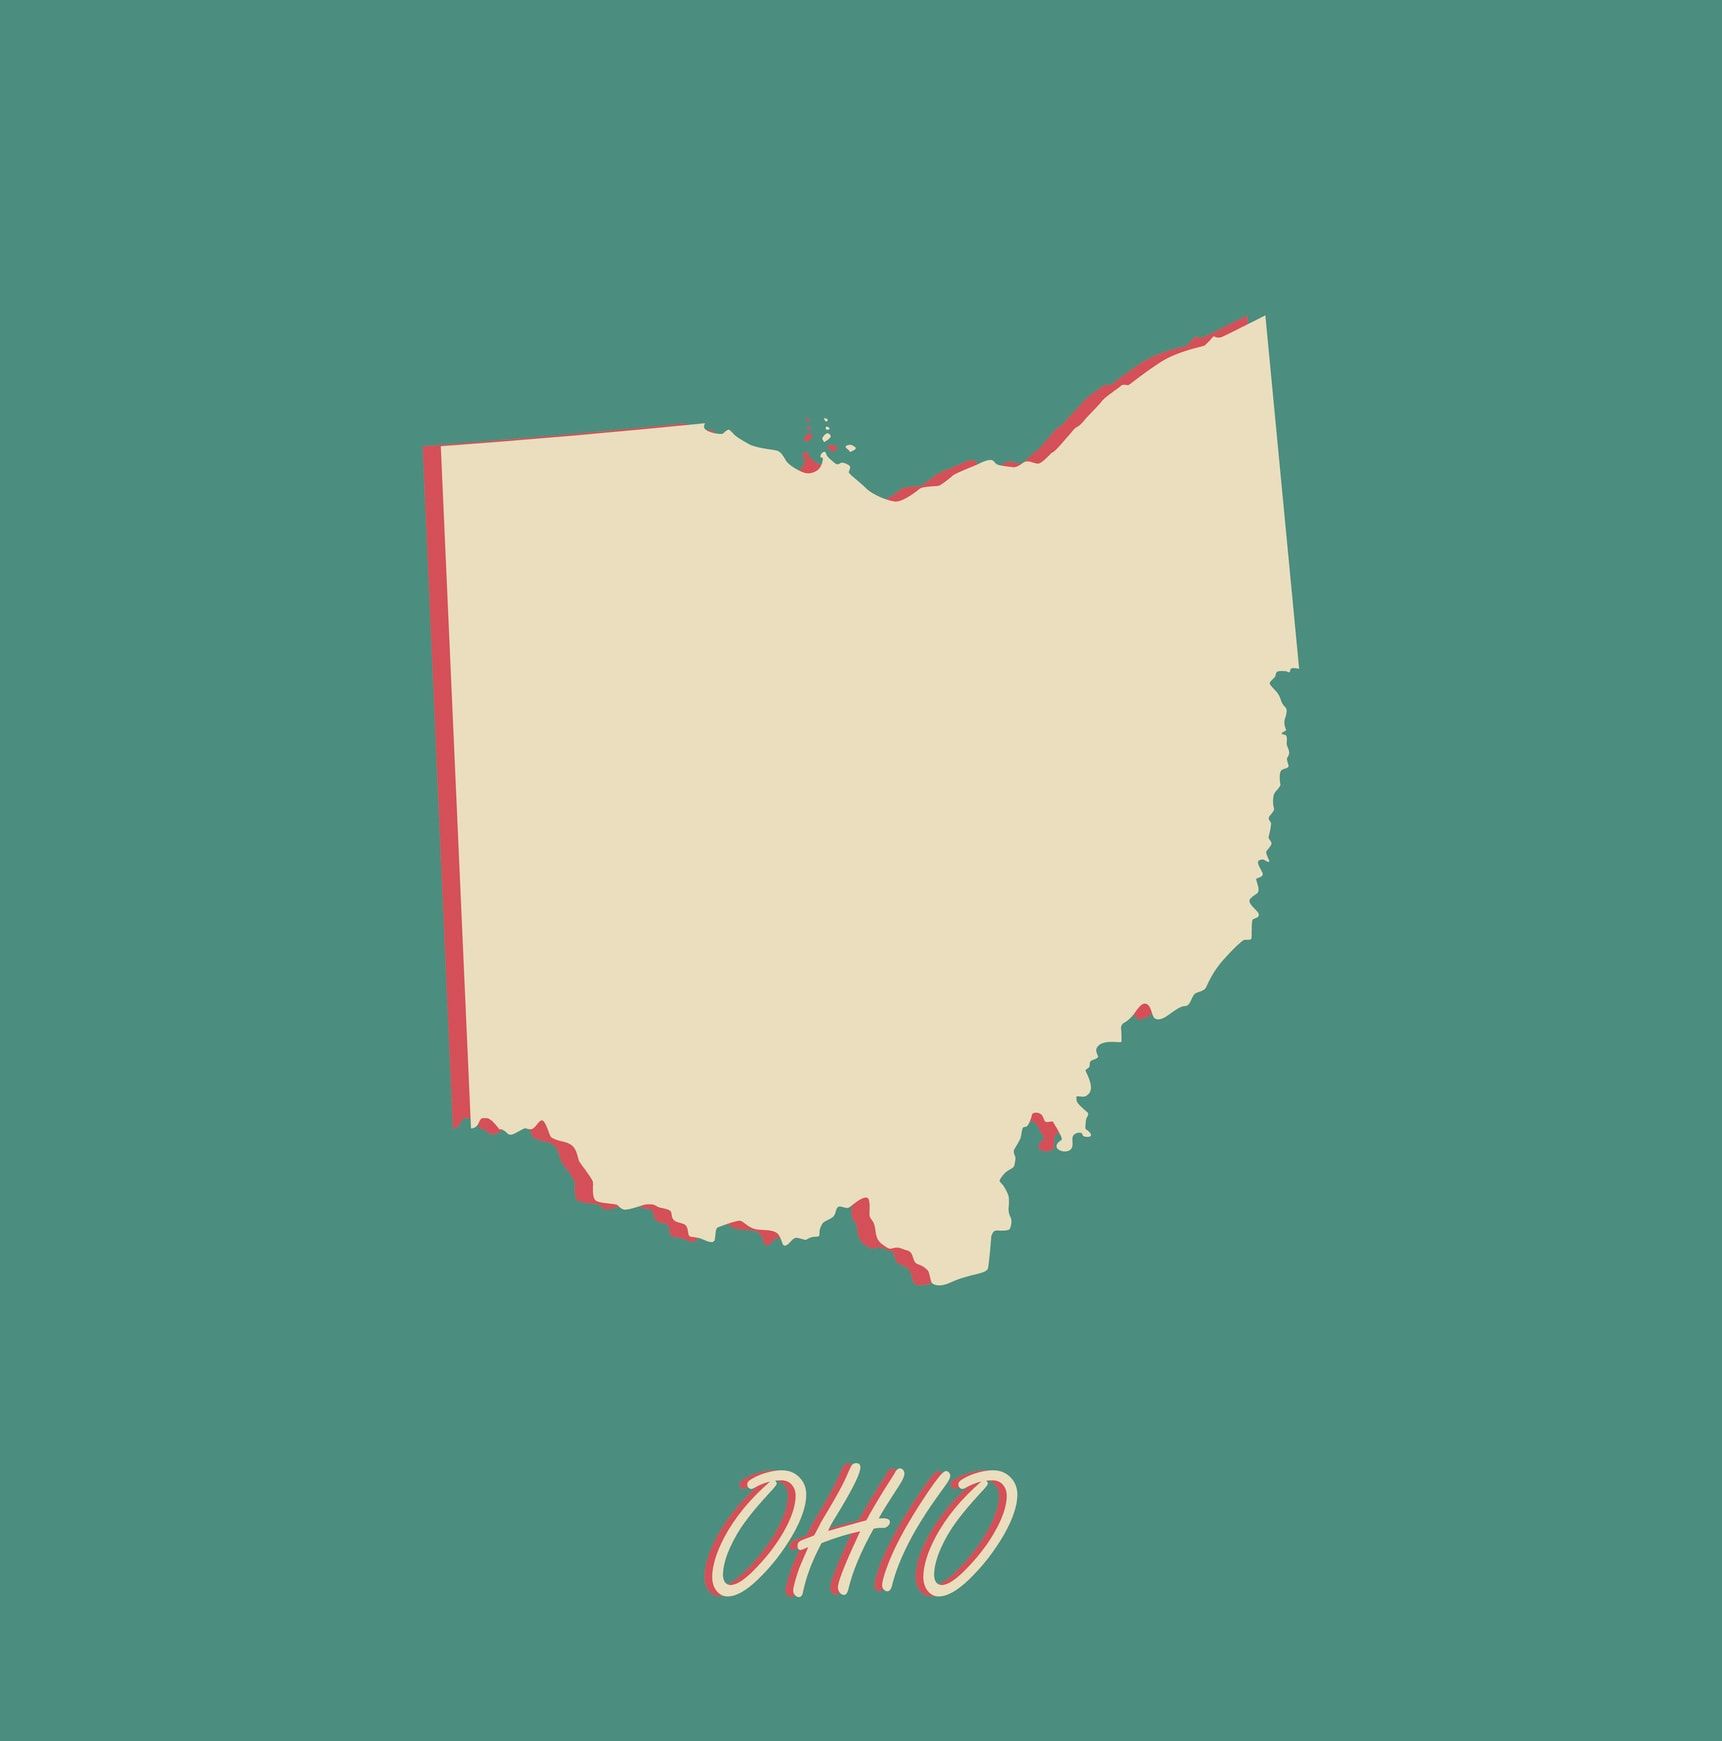 Ohio household employment tax and labor law guide